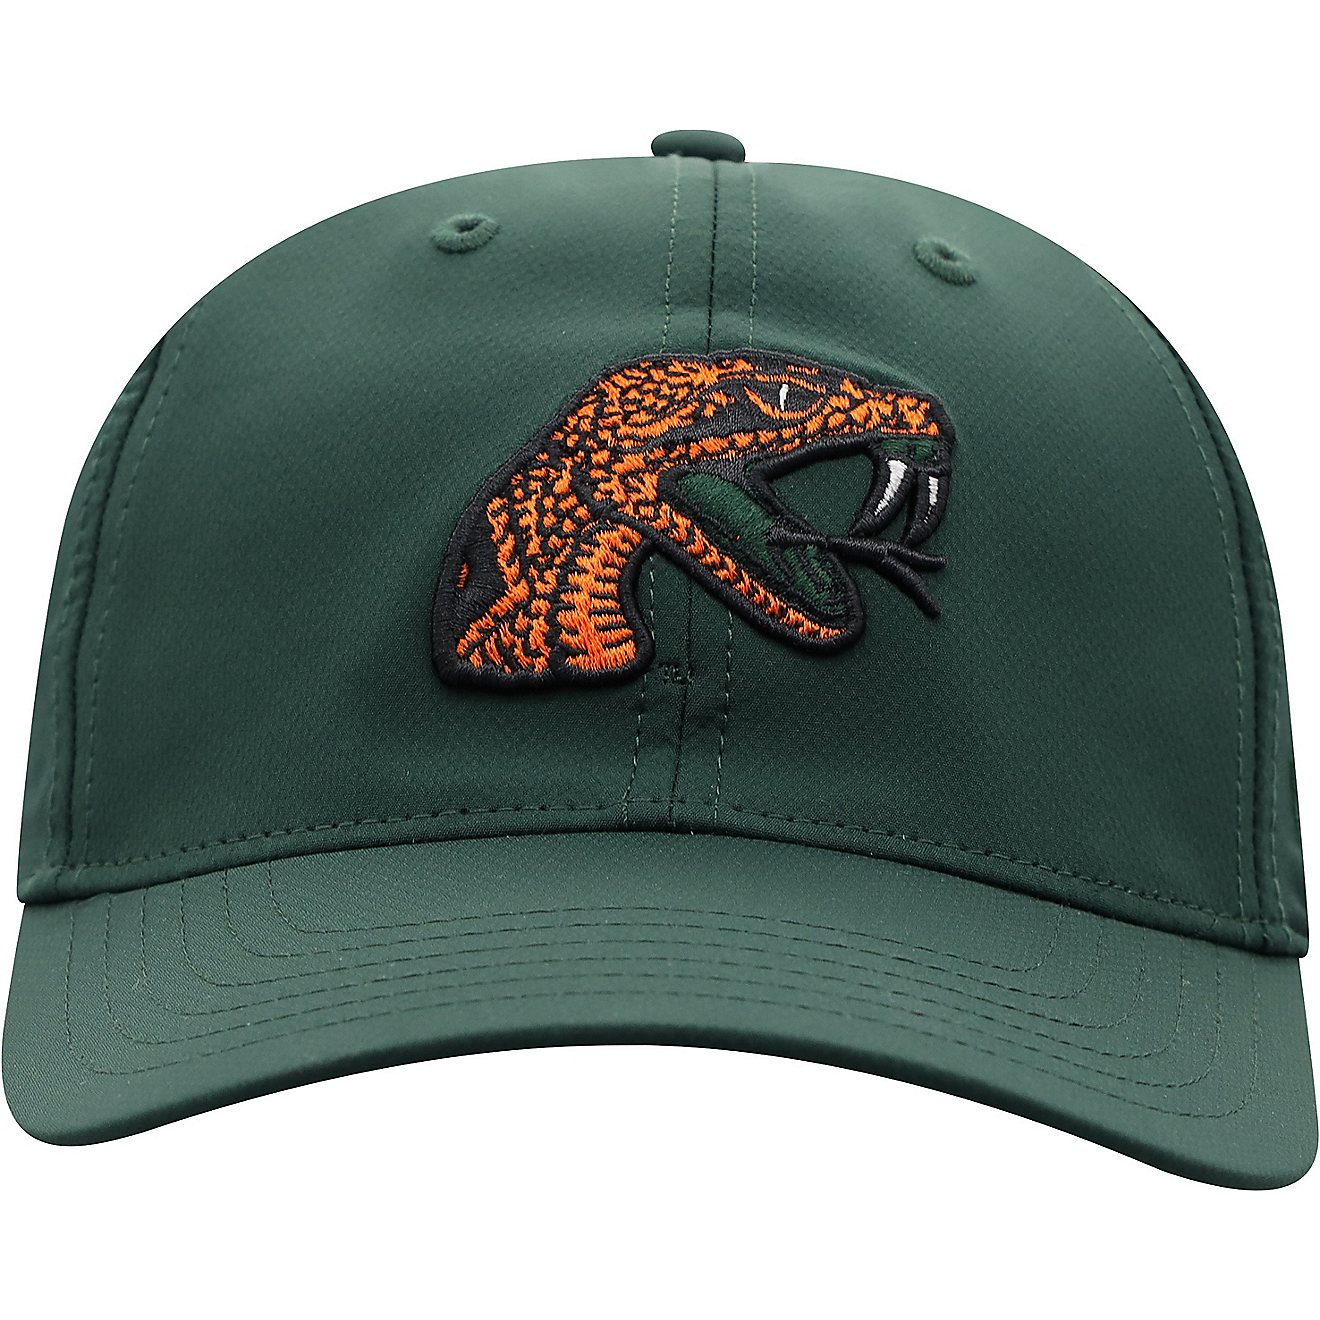 Top of the World Adults' Florida A&M University Trainer 20 Adjustable Team Color Cap                                             - view number 3